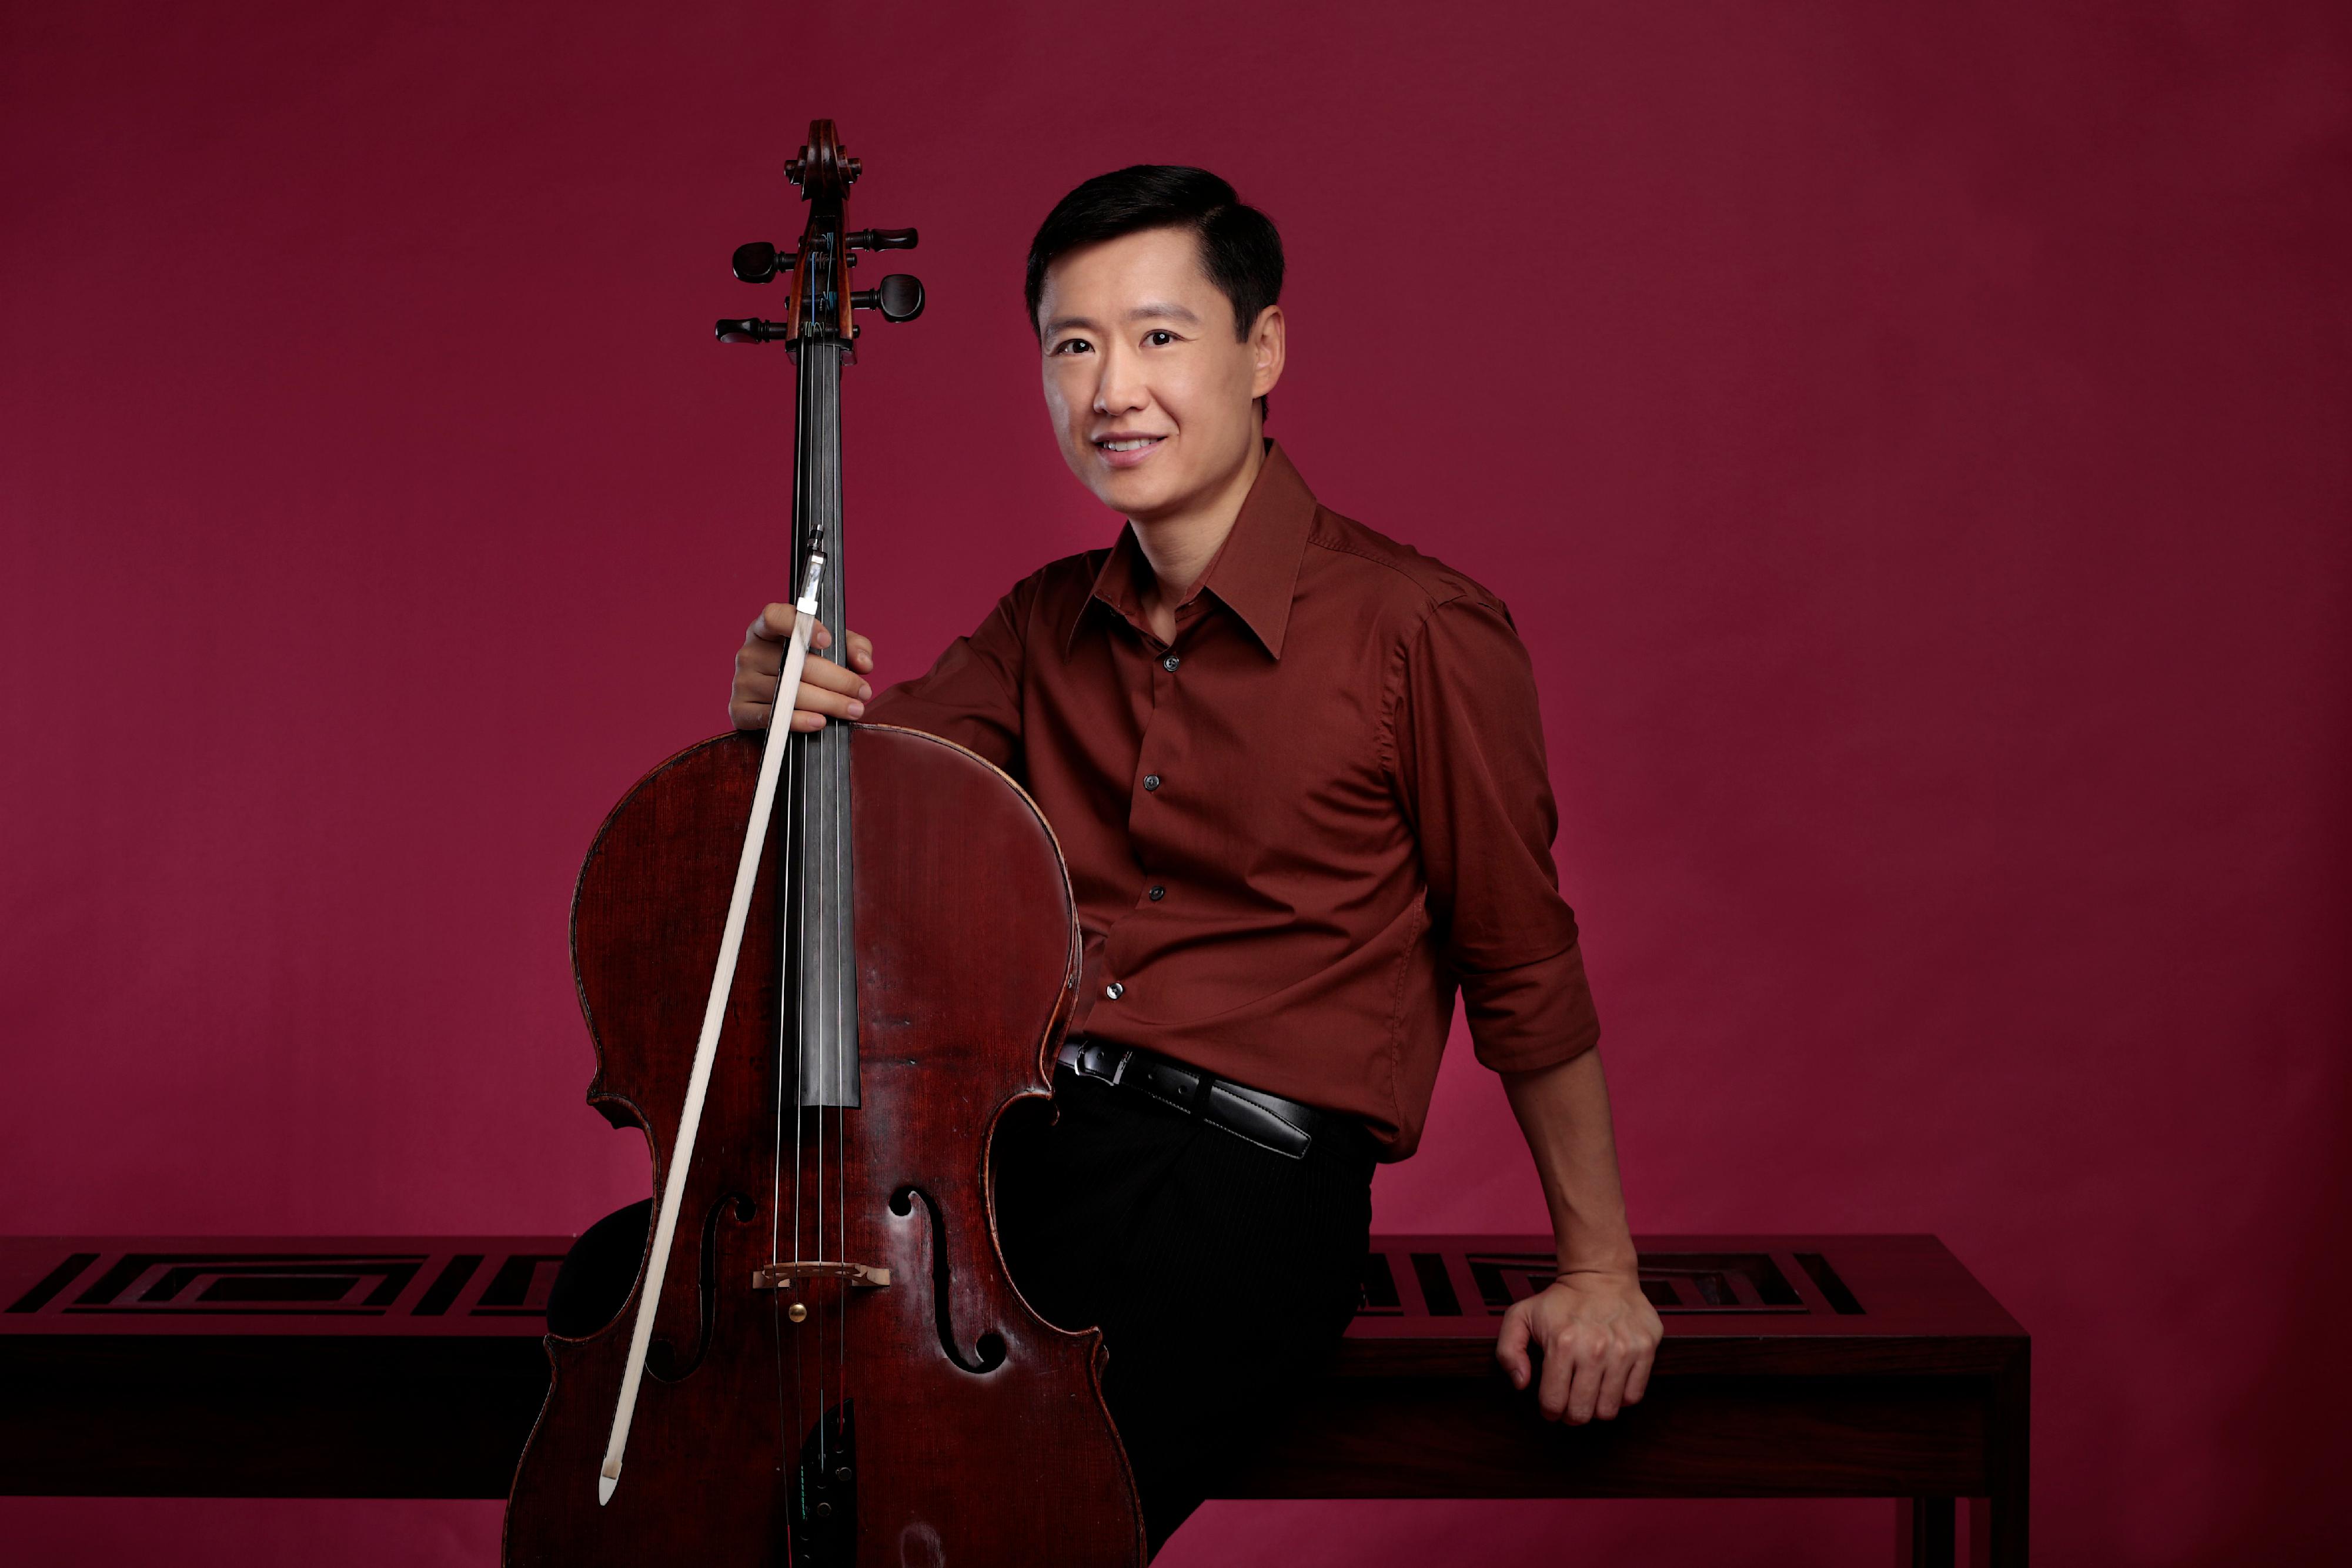 Eight outstanding Hong Kong arts and cultural programmes will be presented at the third Guangdong-Hong Kong-Macao Greater Bay Area Culture and Arts Festival. Photo shows cellist Trey Lee of the touring programme "Dream of the Red Chamber Capriccio & Romantic Cello Works" by Musicus Society.